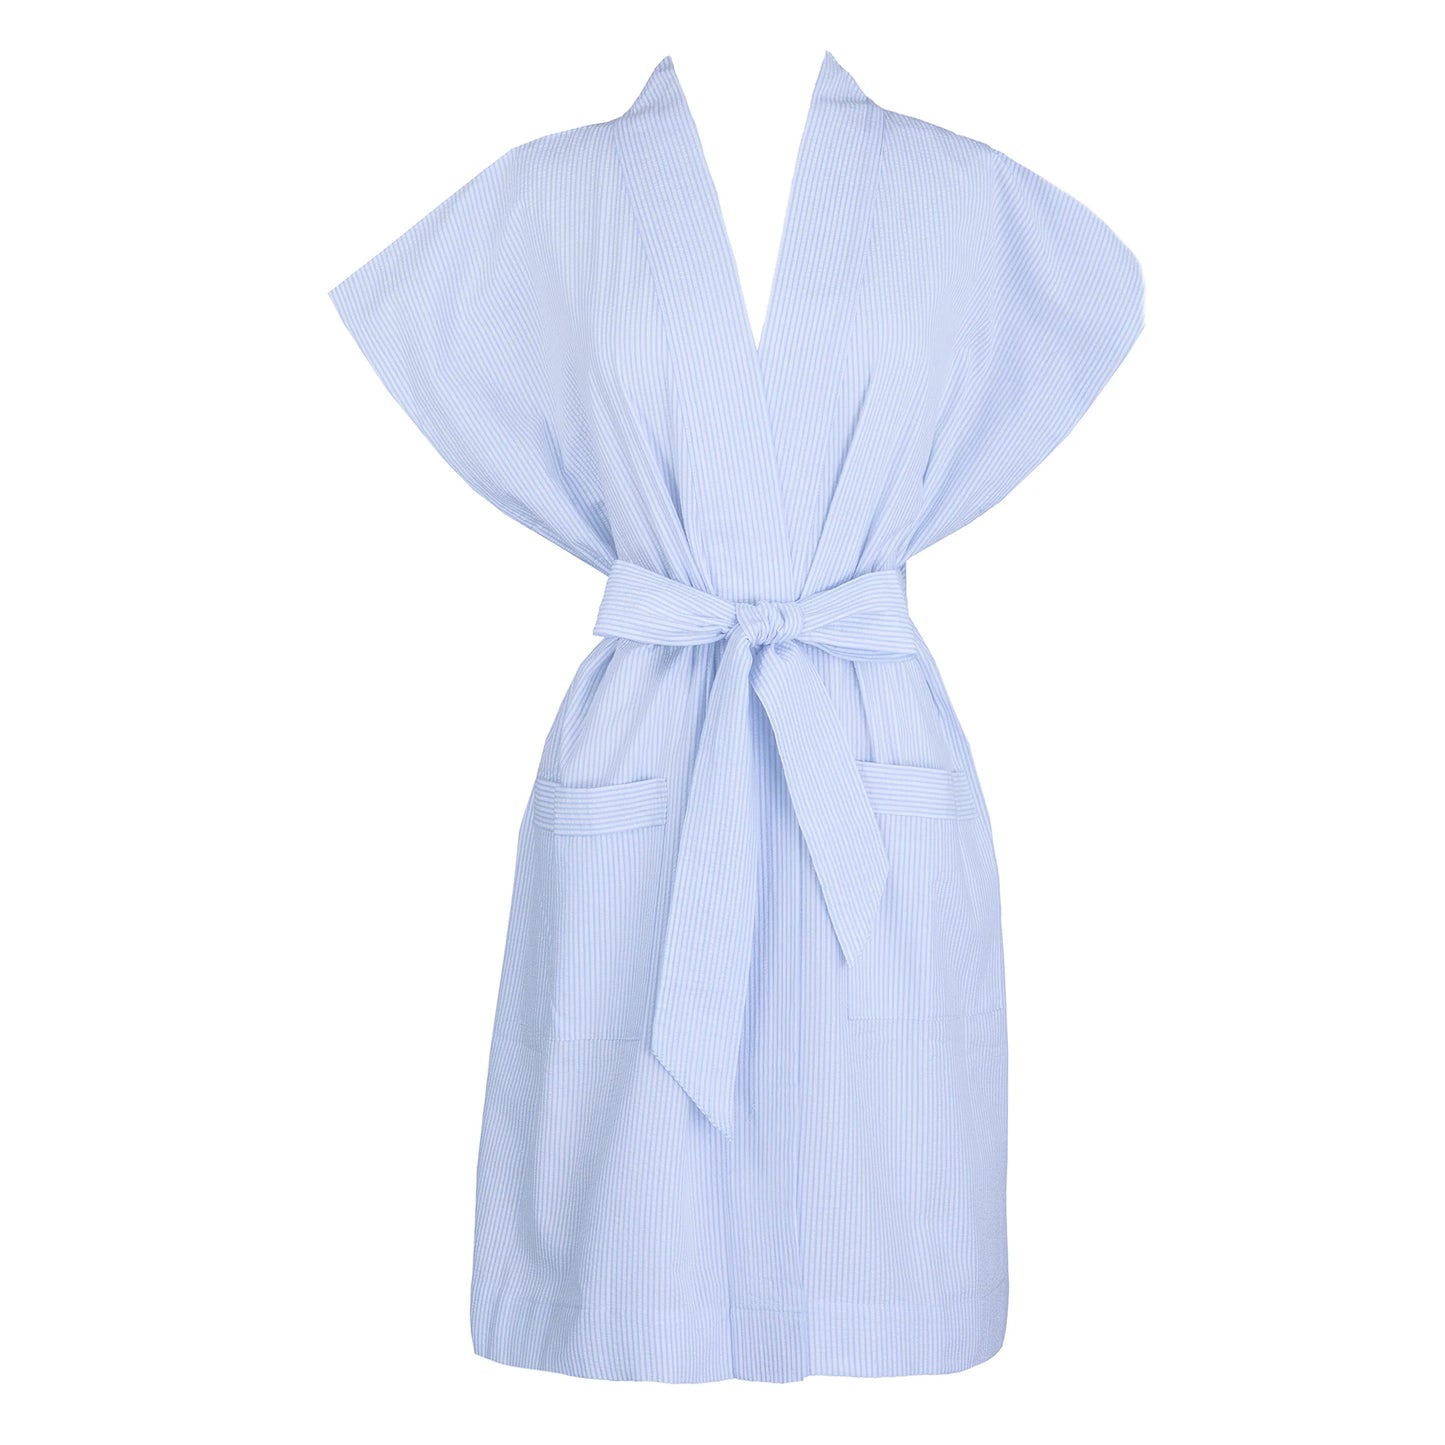 Dina Cotton Robe in Blue By Lenora - S-XL